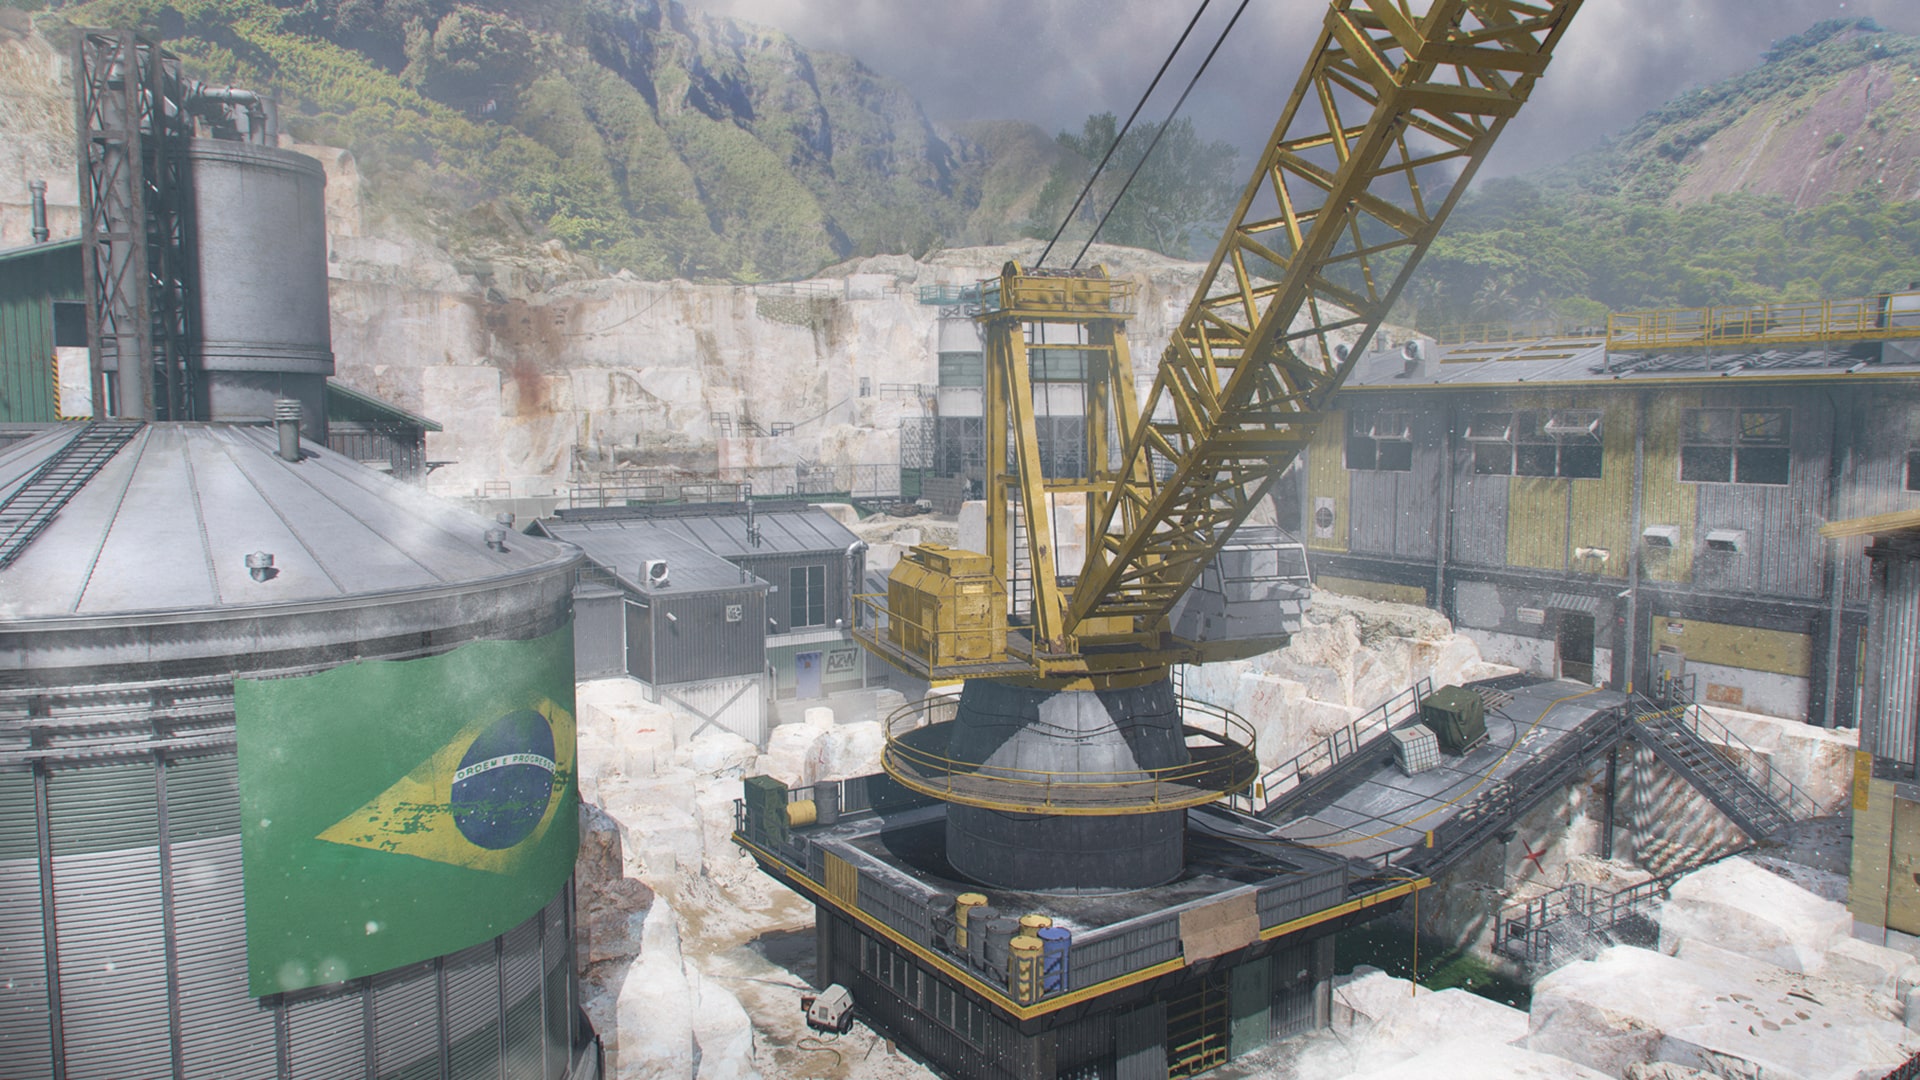 Activision is already removing maps from Call of Duty: Modern Warfare 3 -  Xfire